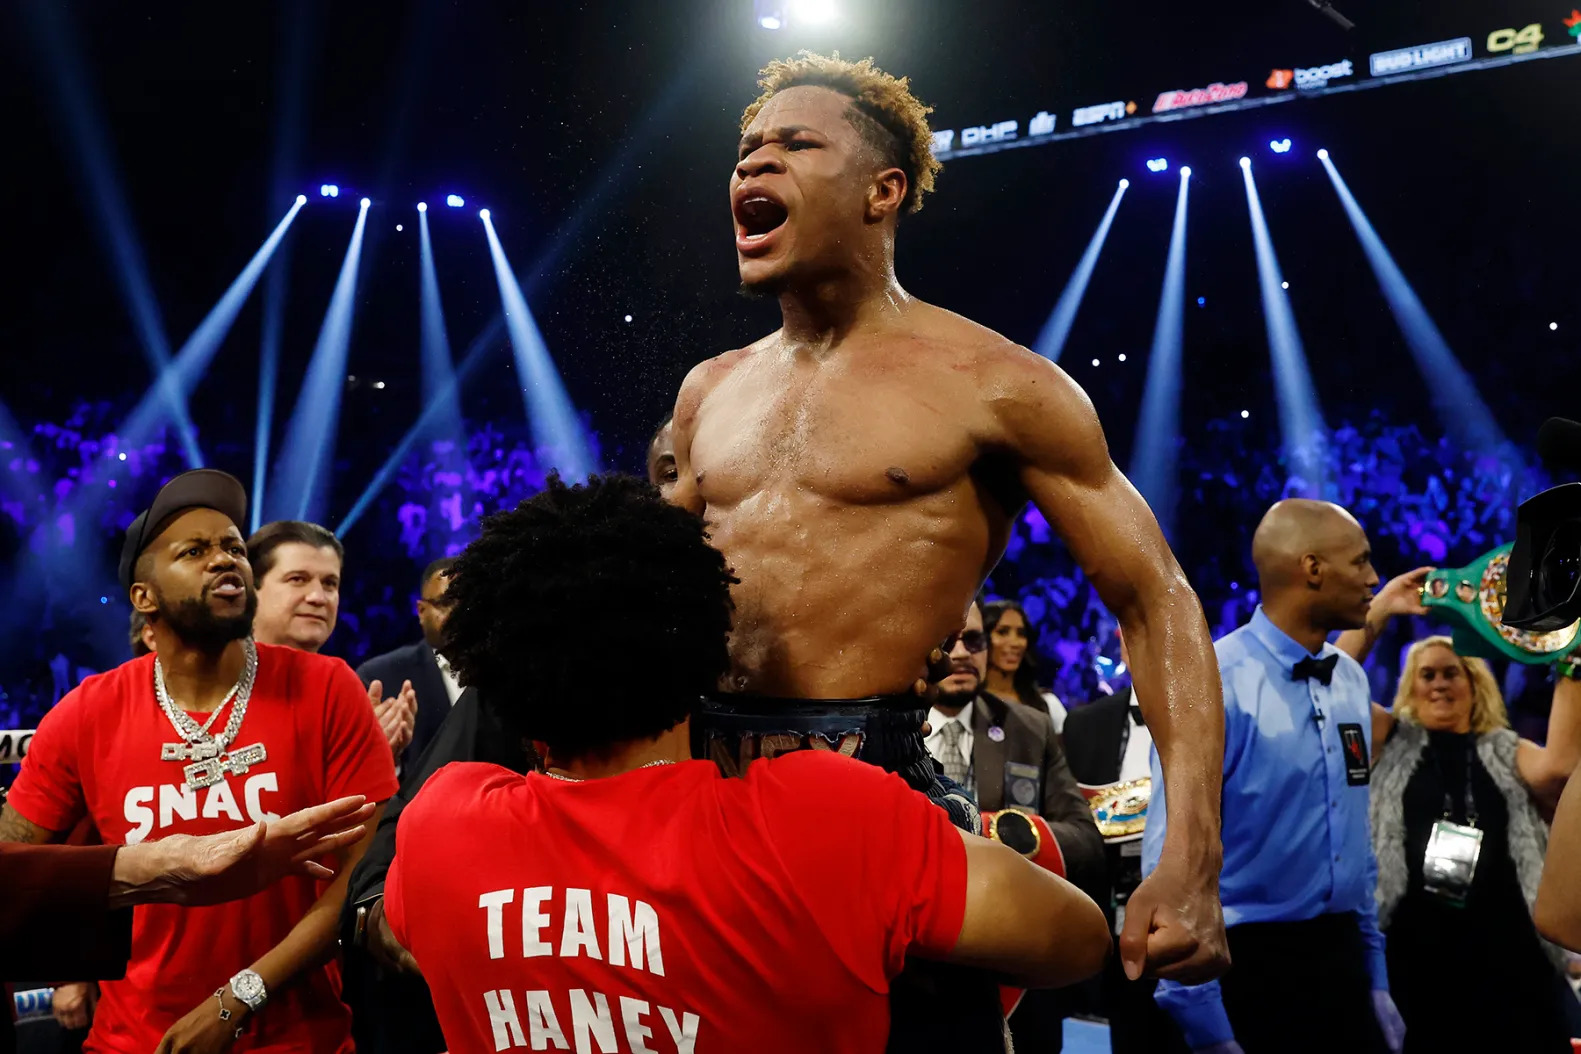 Devin Haney wins the fight against Prograis and received praise